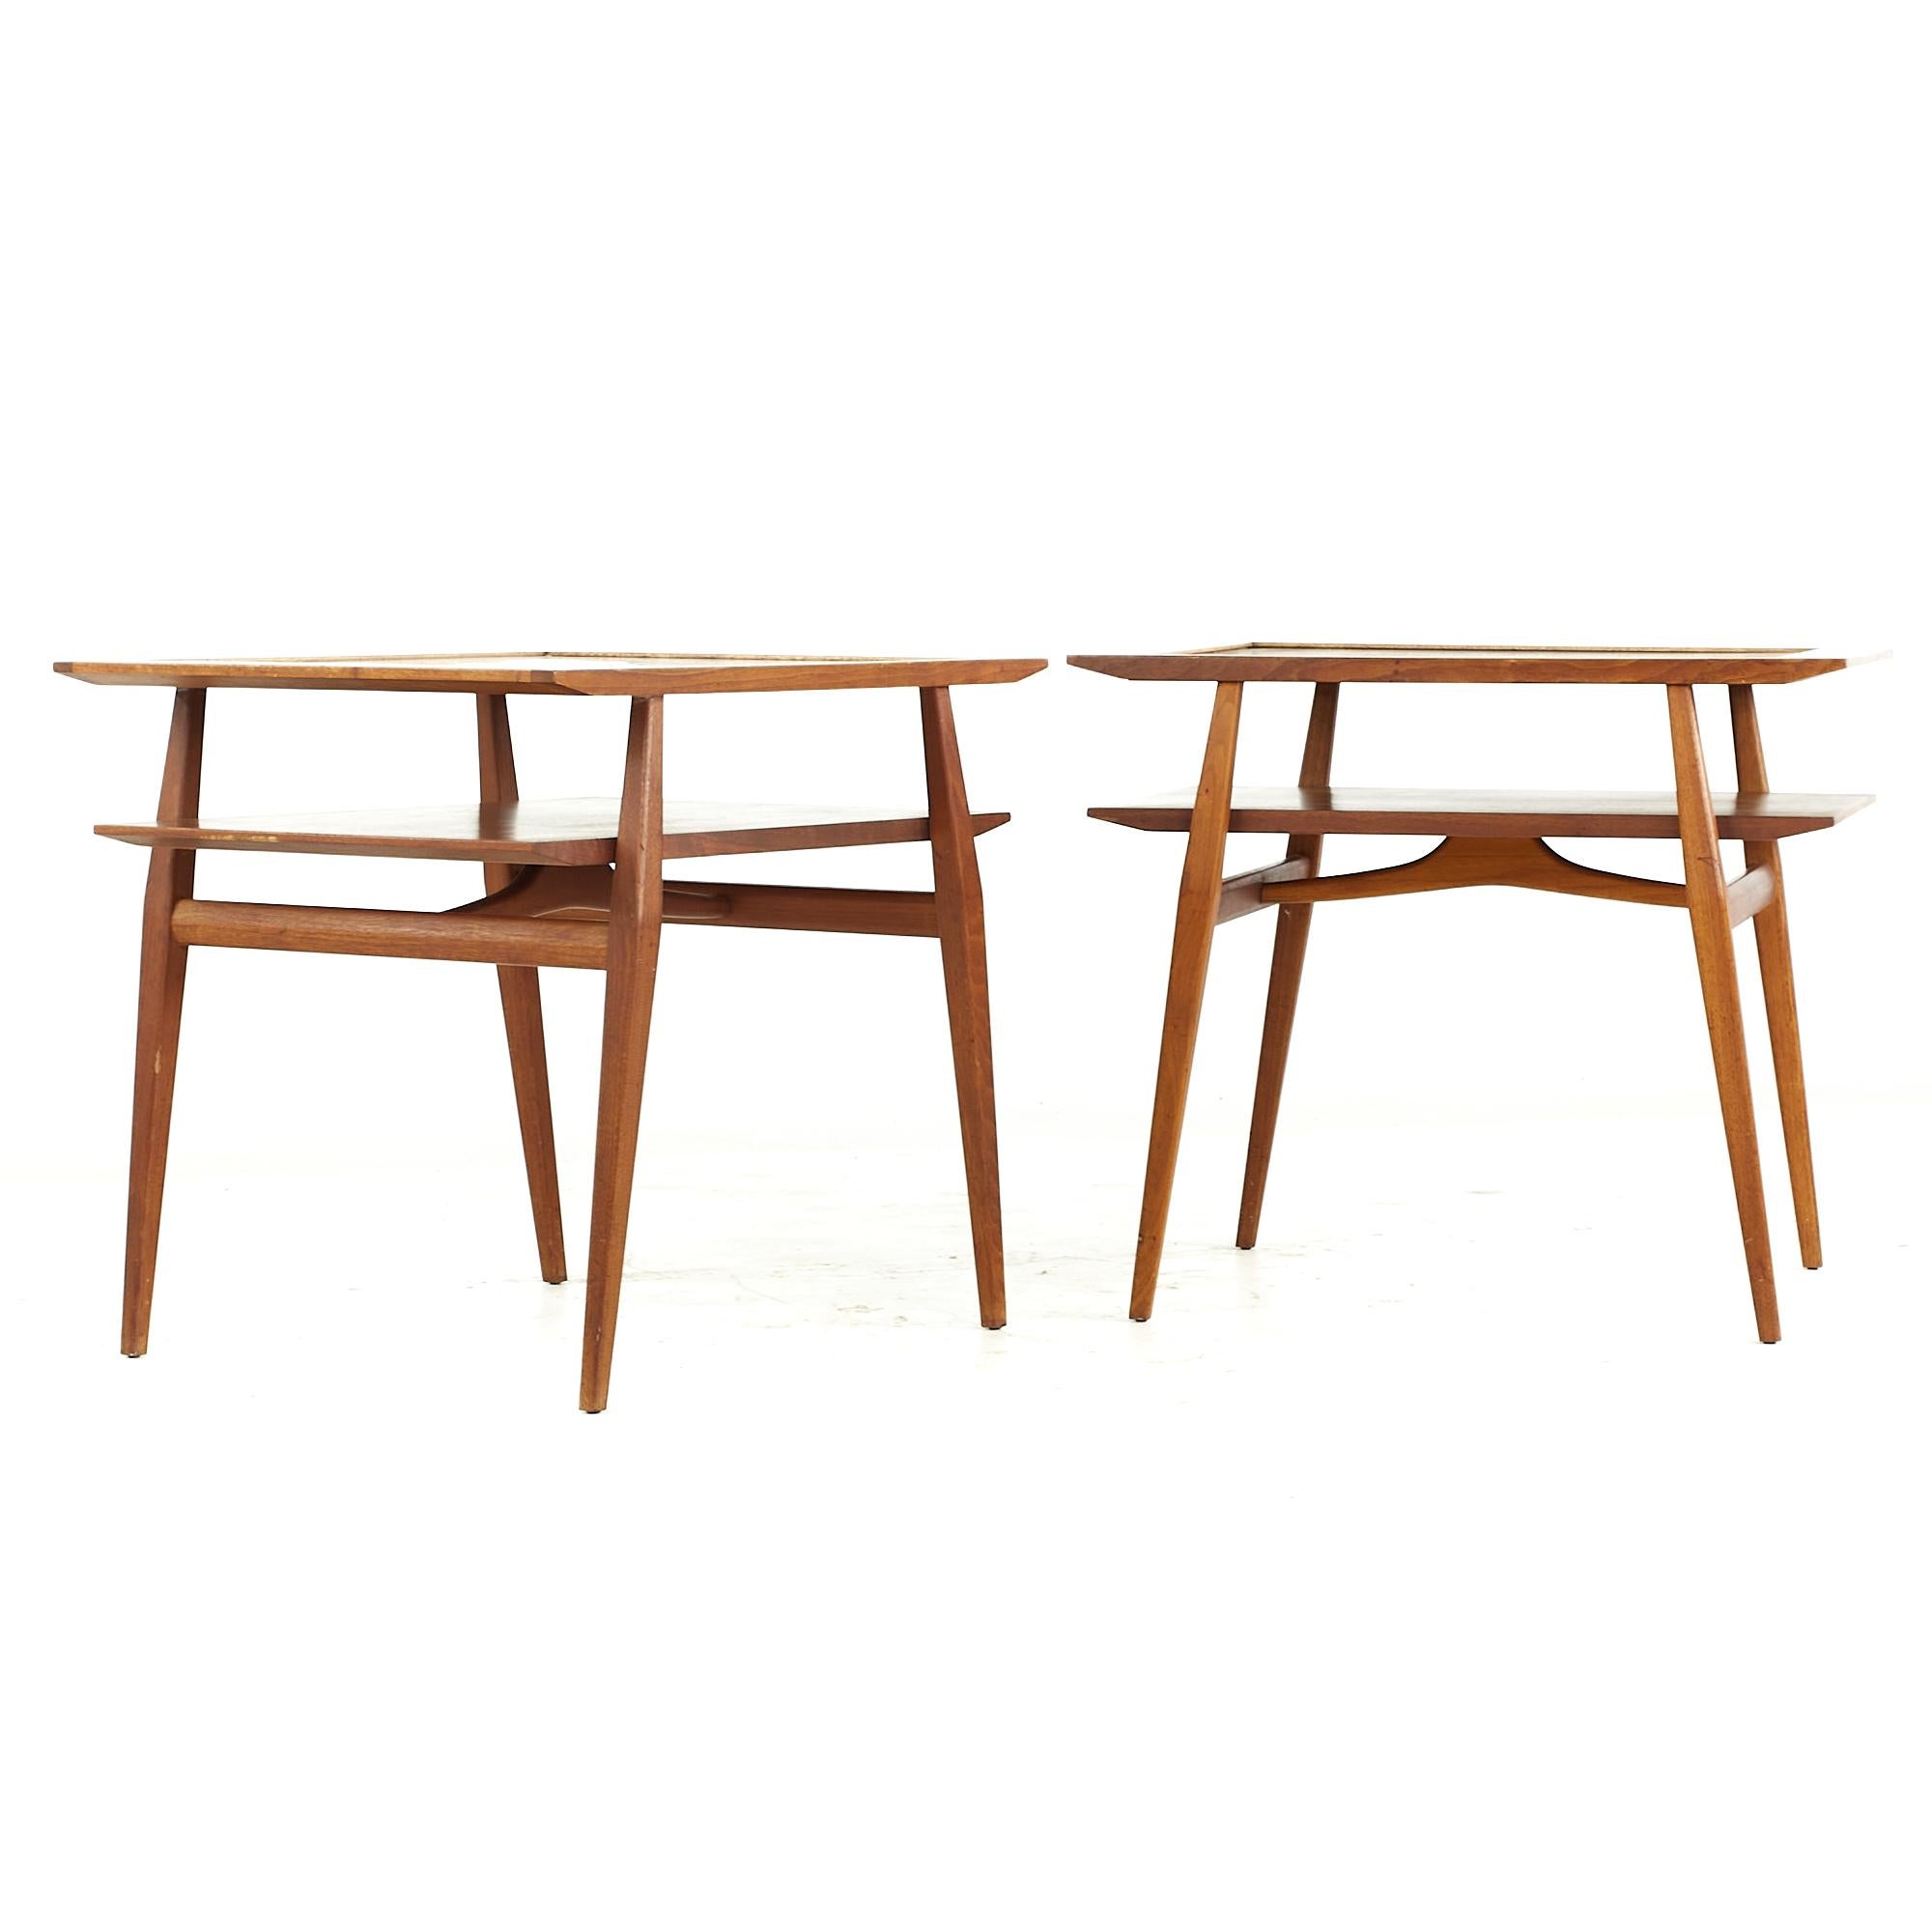 Bertha Schaefer for Singer & Sons American mid-century Two-Tier Walnut and Laminate Side End Tables - Pair
each side table measures: 28 wide x 22.25 deep x 24.25 inches high
all pieces of furniture can be had in what we call restored vintage